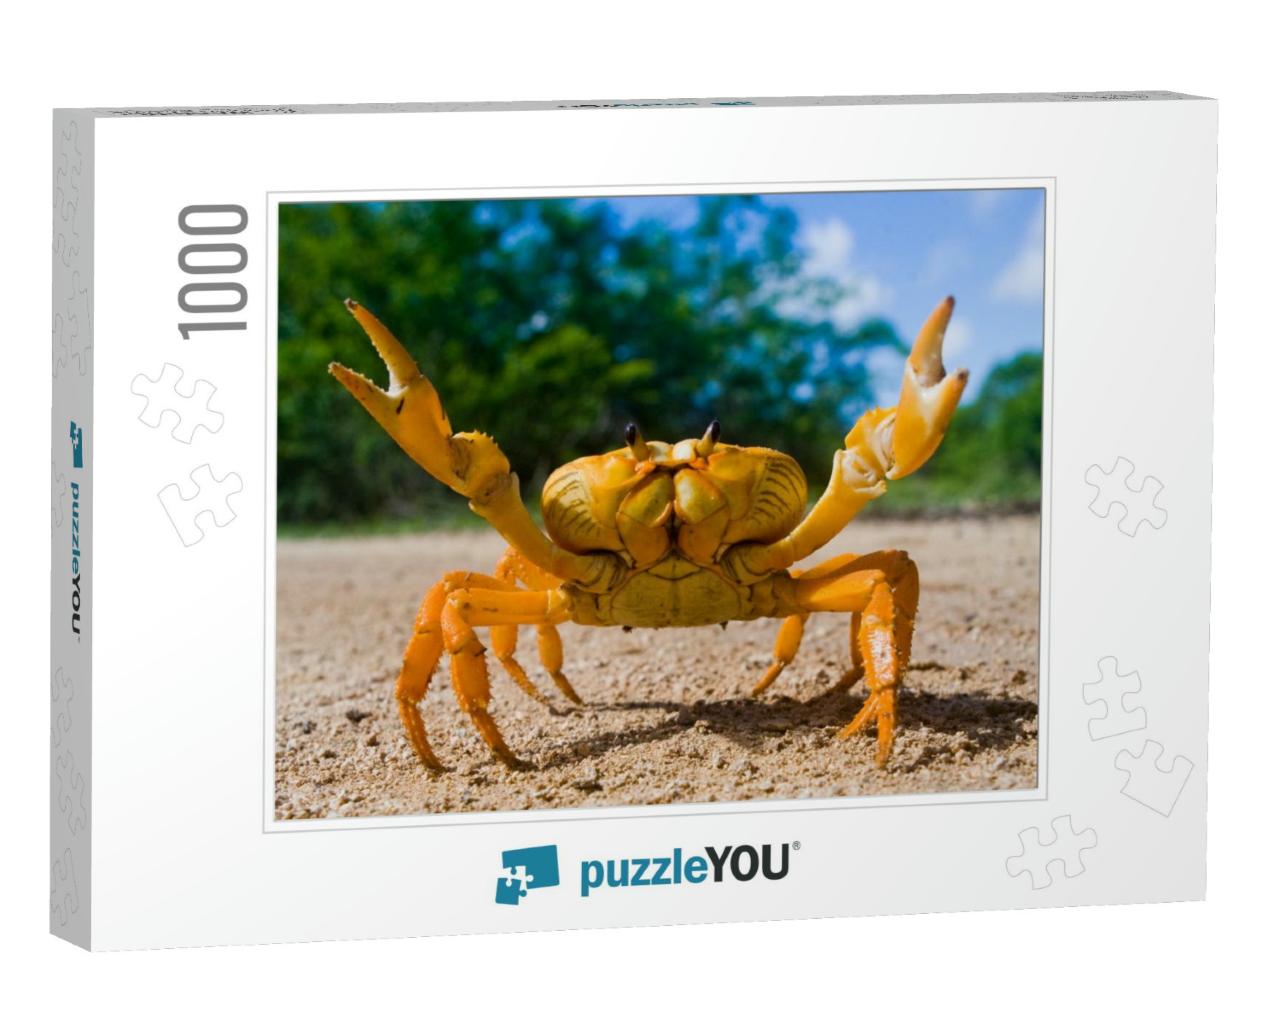 Yellow Land Crab. Cuba... Jigsaw Puzzle with 1000 pieces